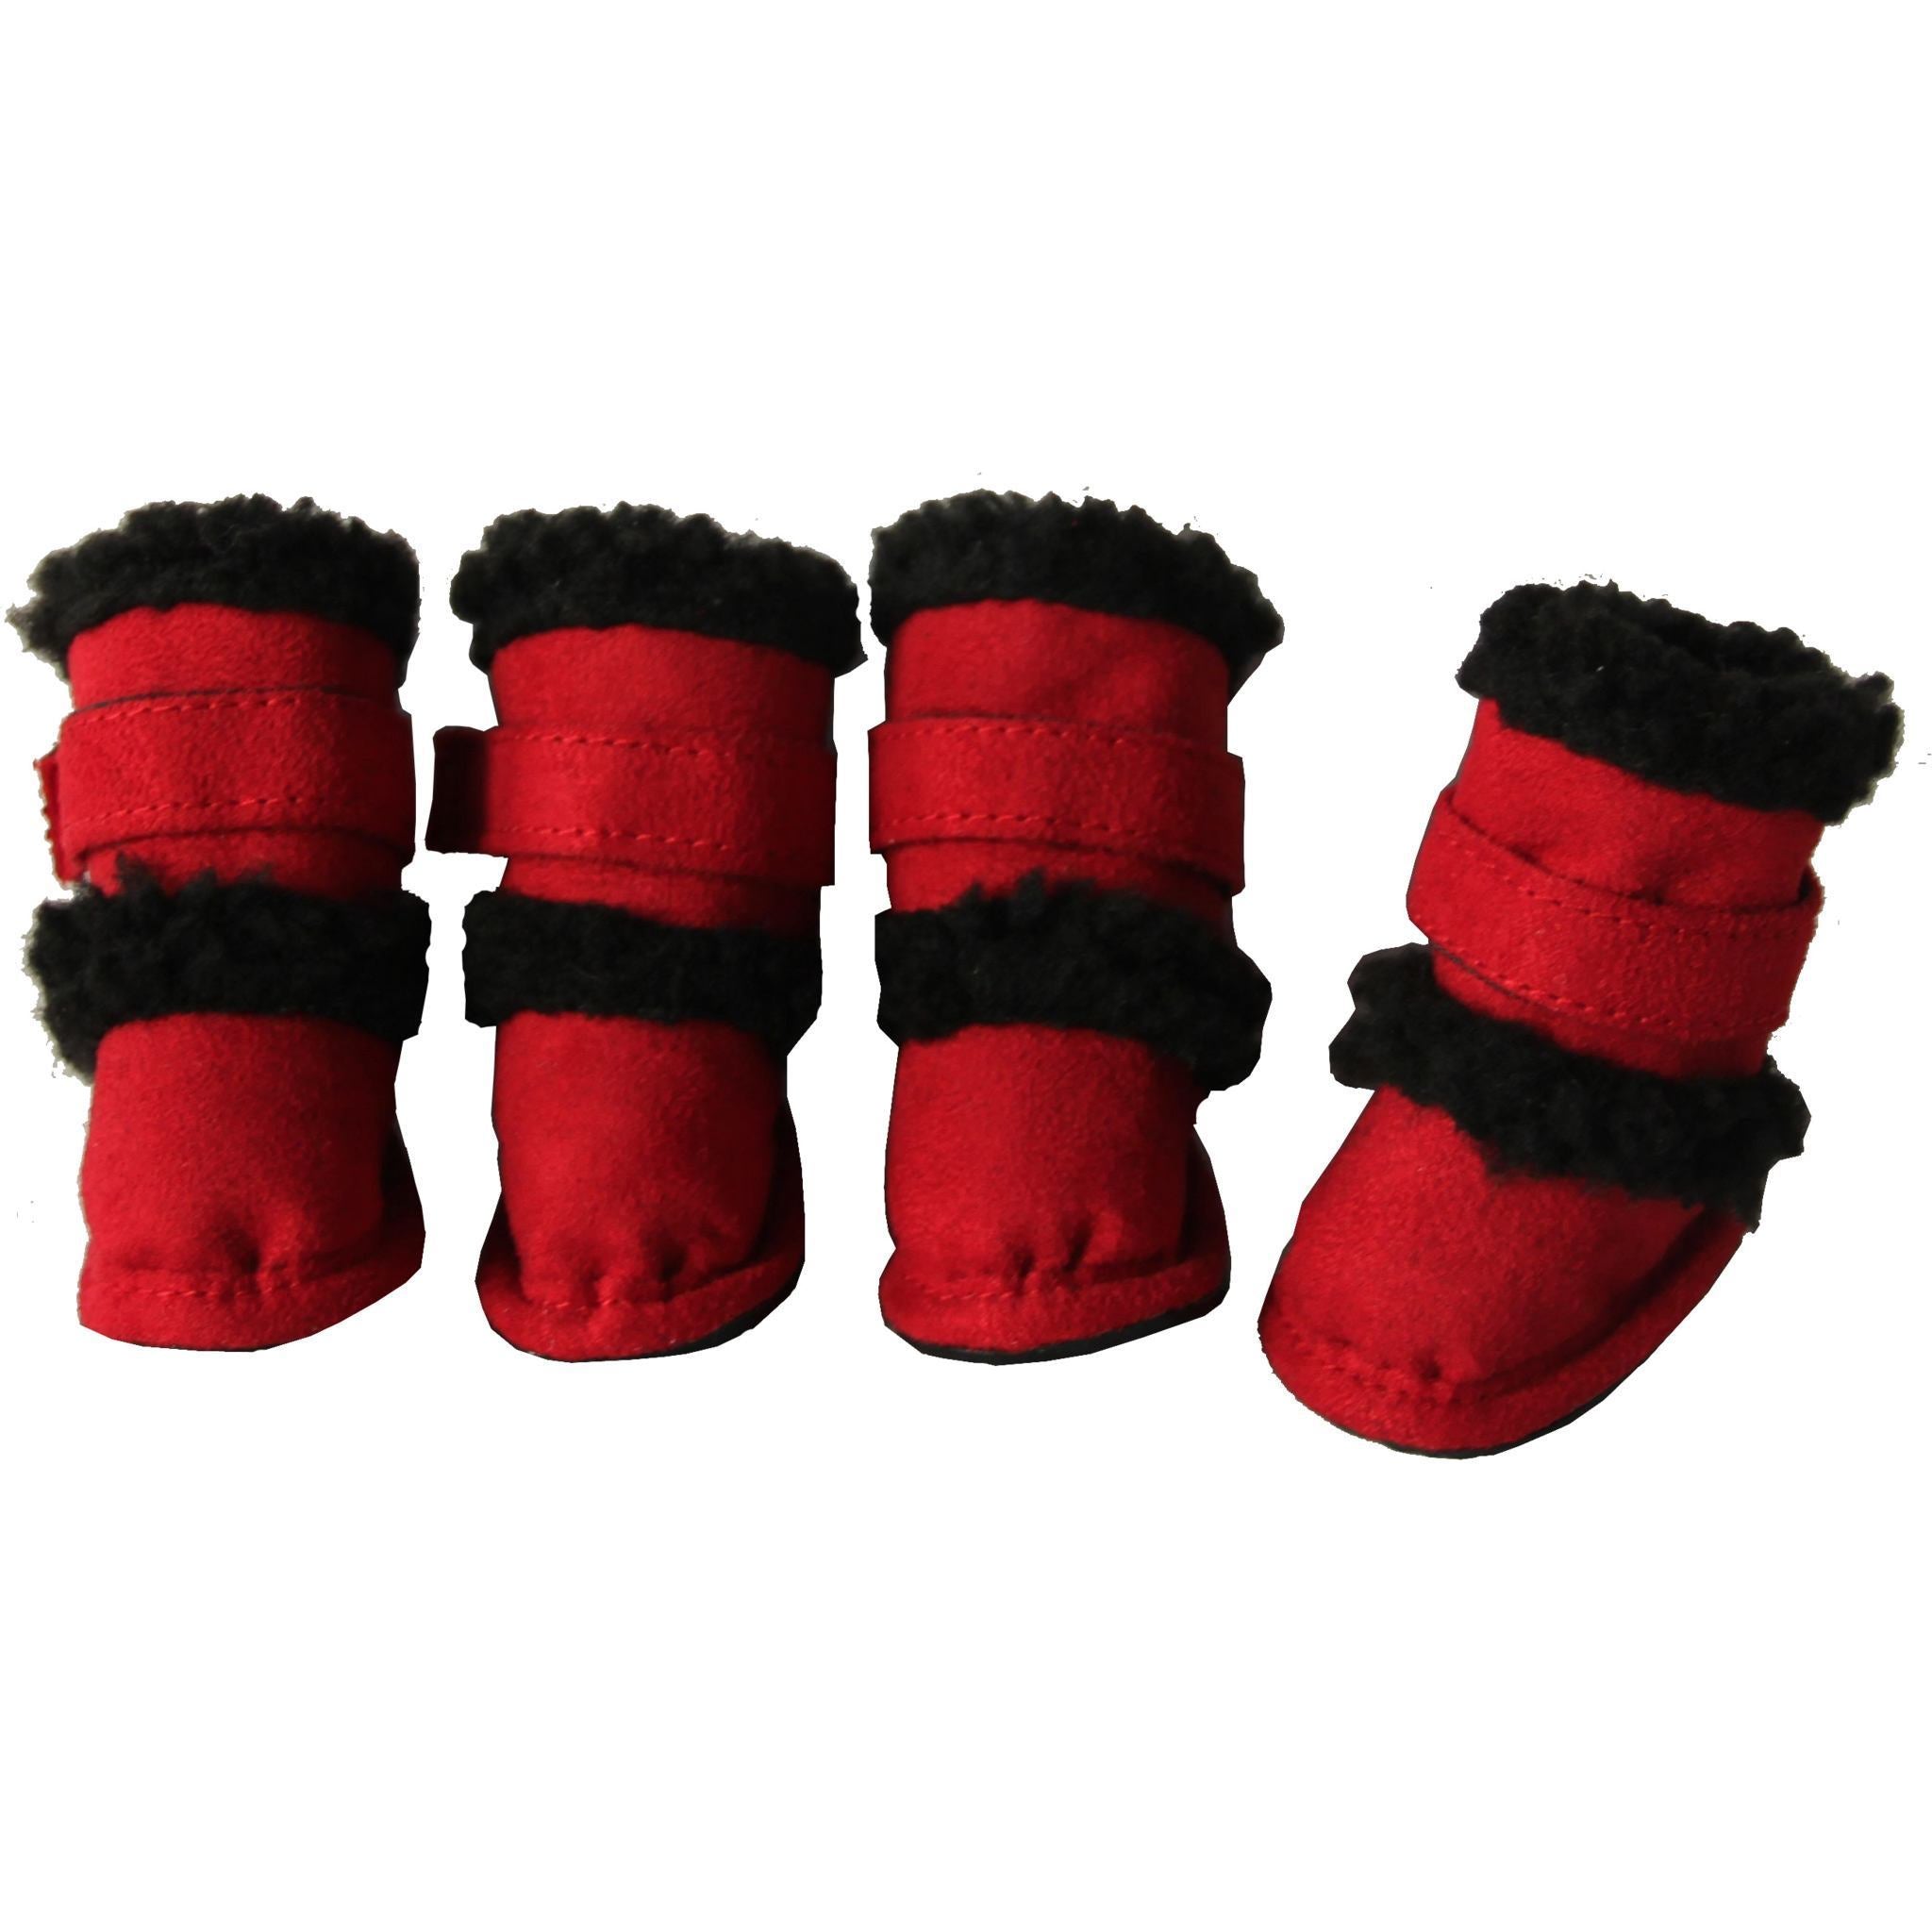 Pet Life ® 'Duggz' 3M Insulated Winter Fashion Dog Shoes Booties - Set of 4 X-Small Red & Black